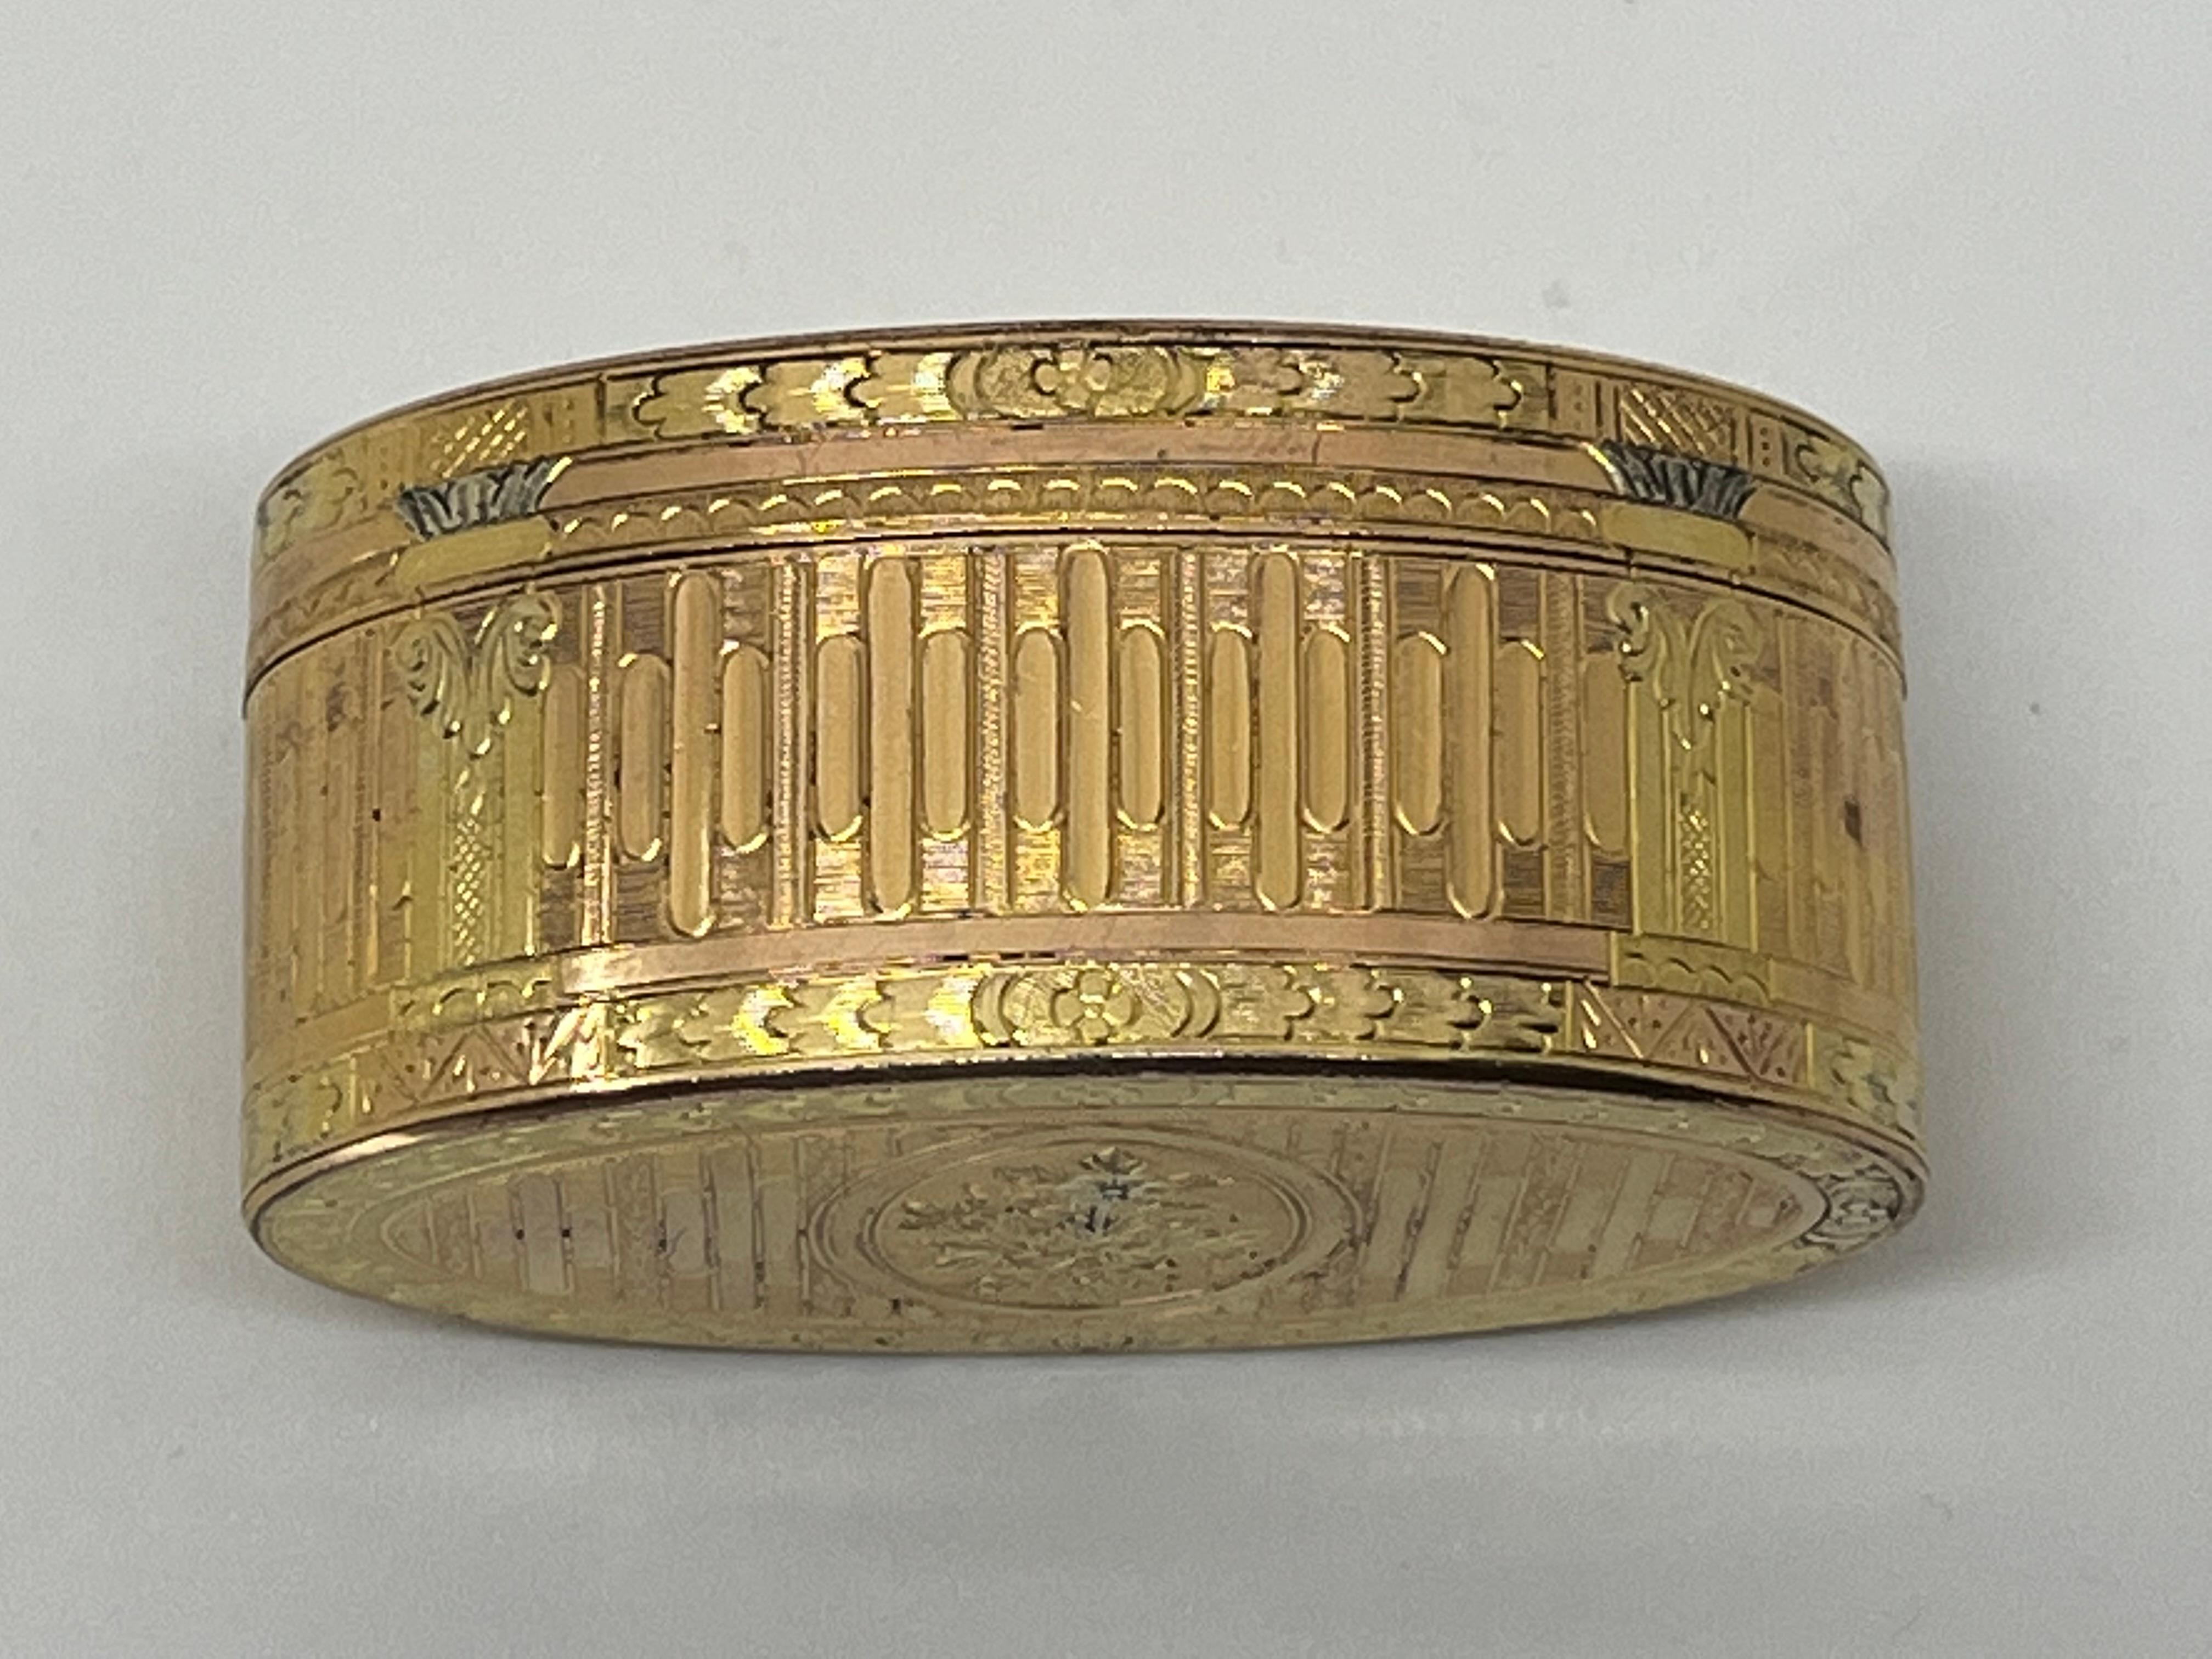 French Eighteenth-Century Silver-Gilt Snuff Box, of Outstanding Quality 1